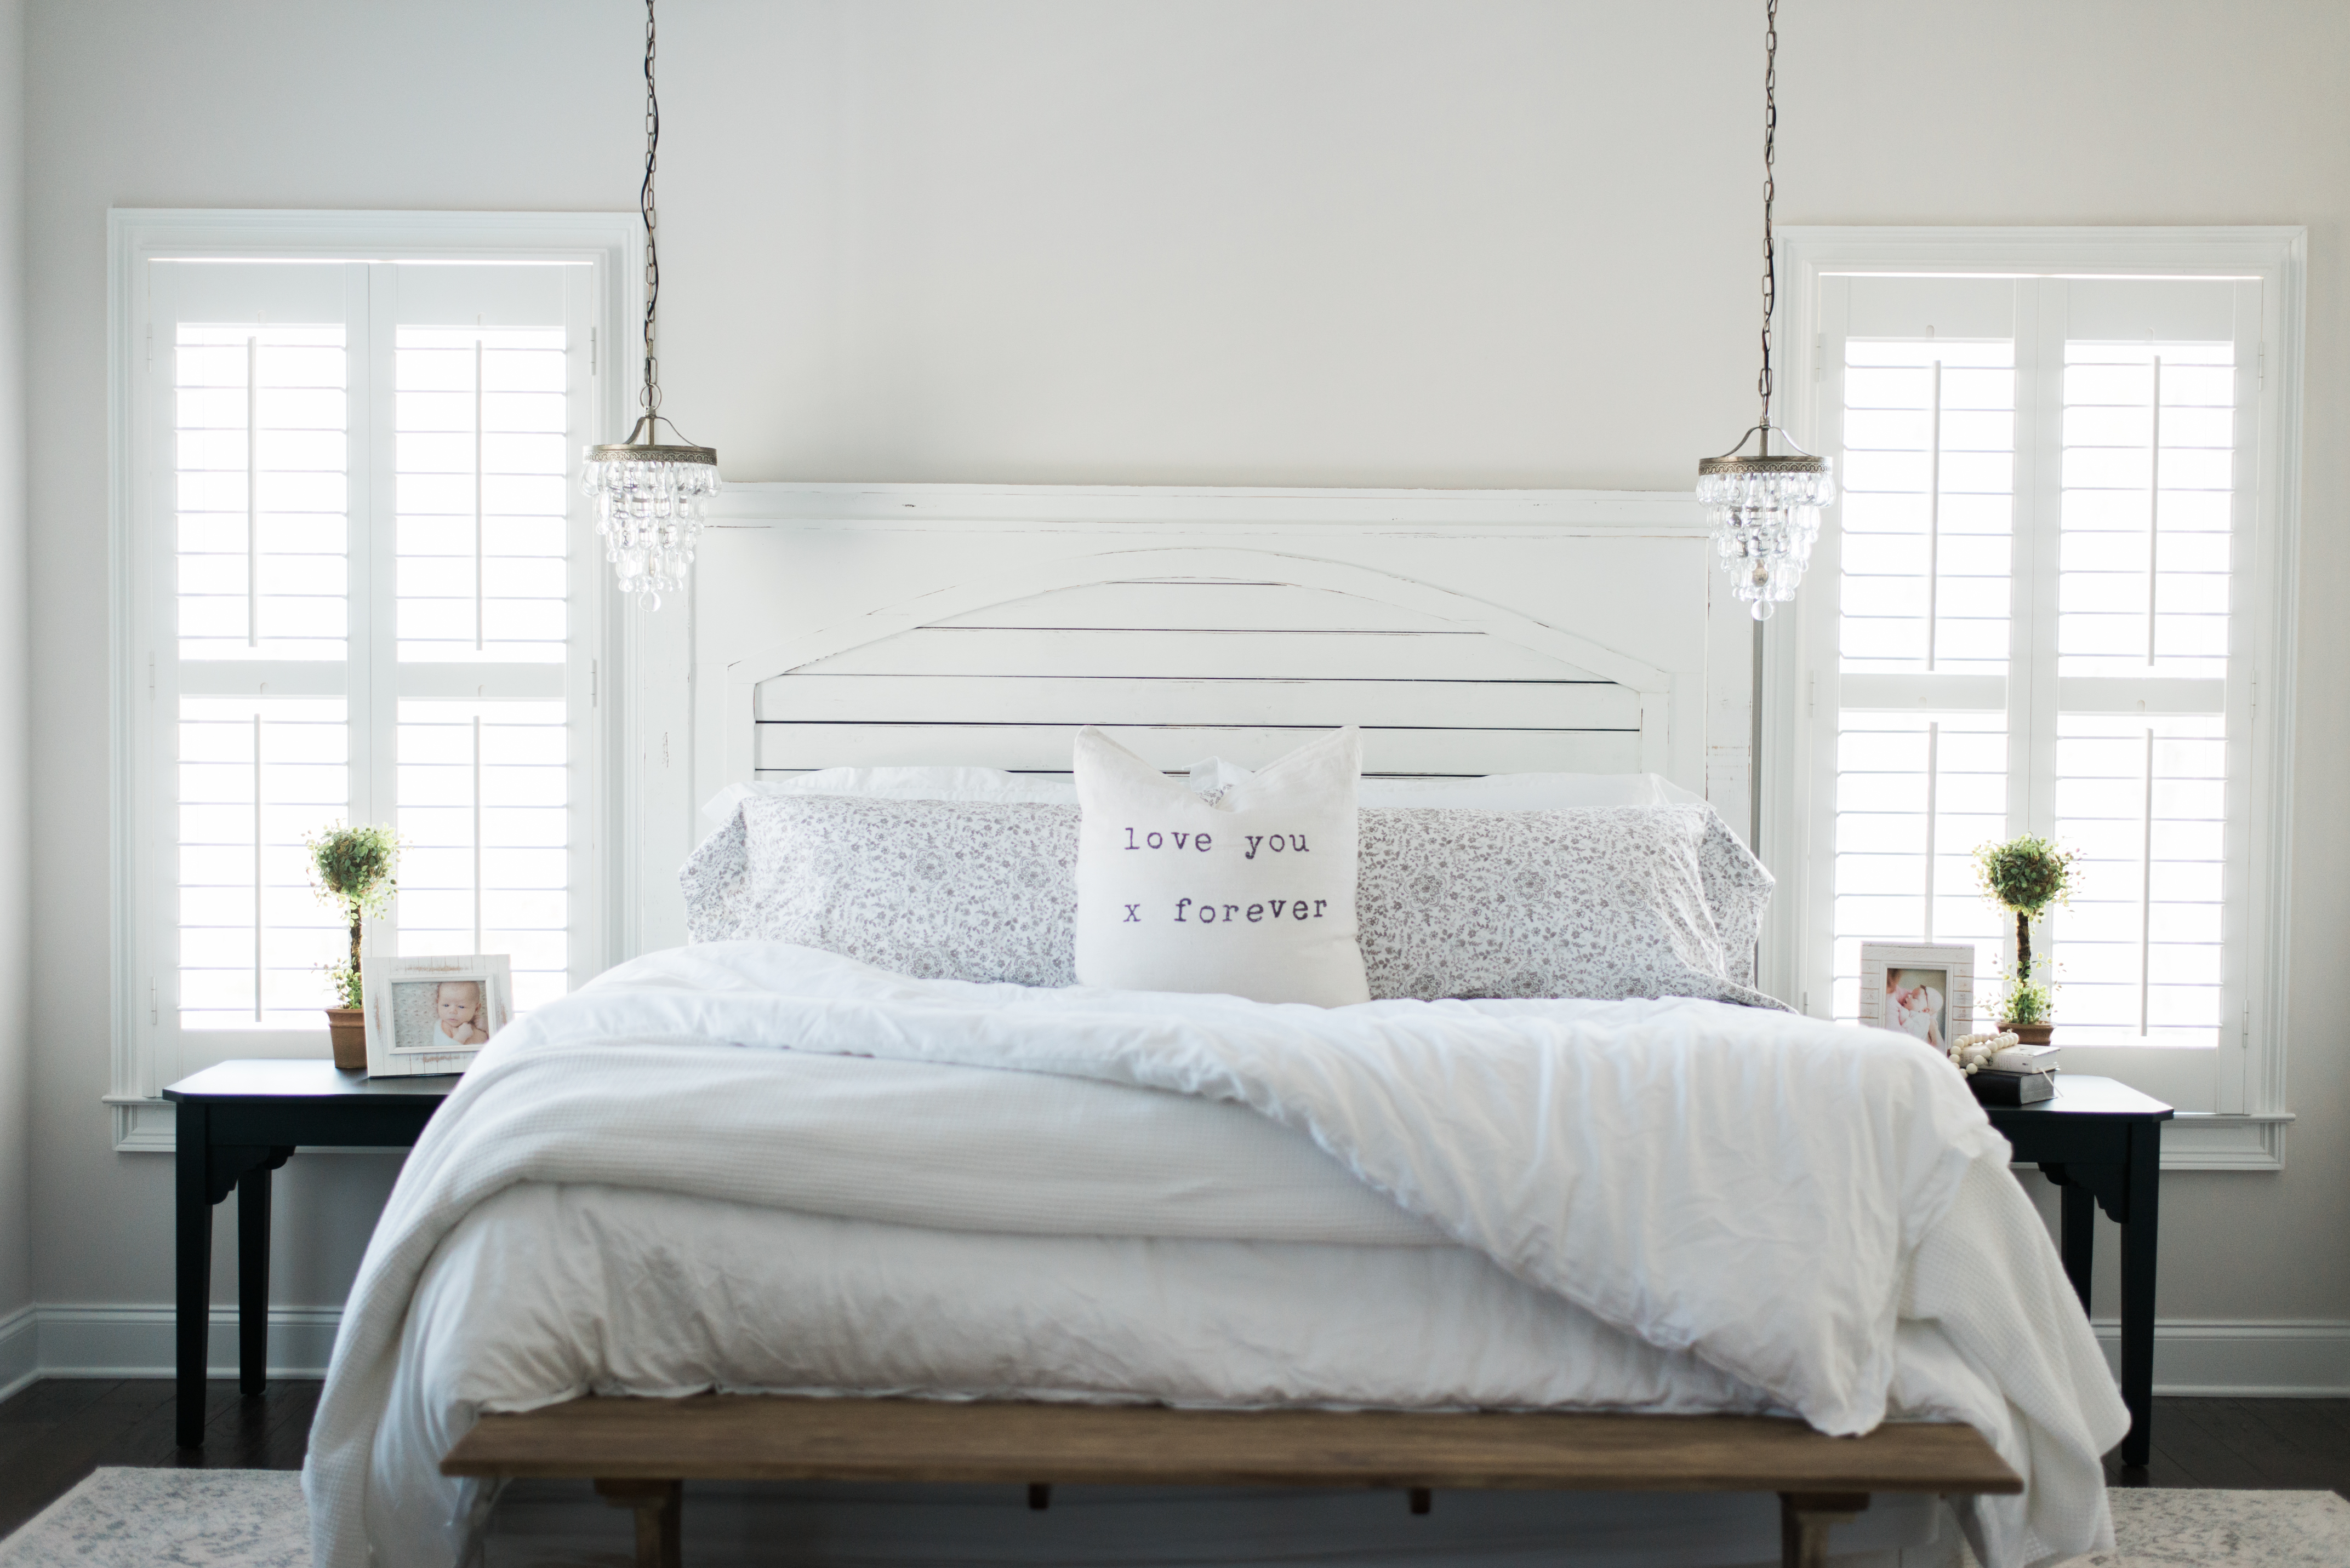 Bookmark this post for the perfect master bedroom reveal thanks to Motherhood and Lifestyle blogger Meghan Basinger. Trust me you will want to see this master bedroom- it is STUNNING!